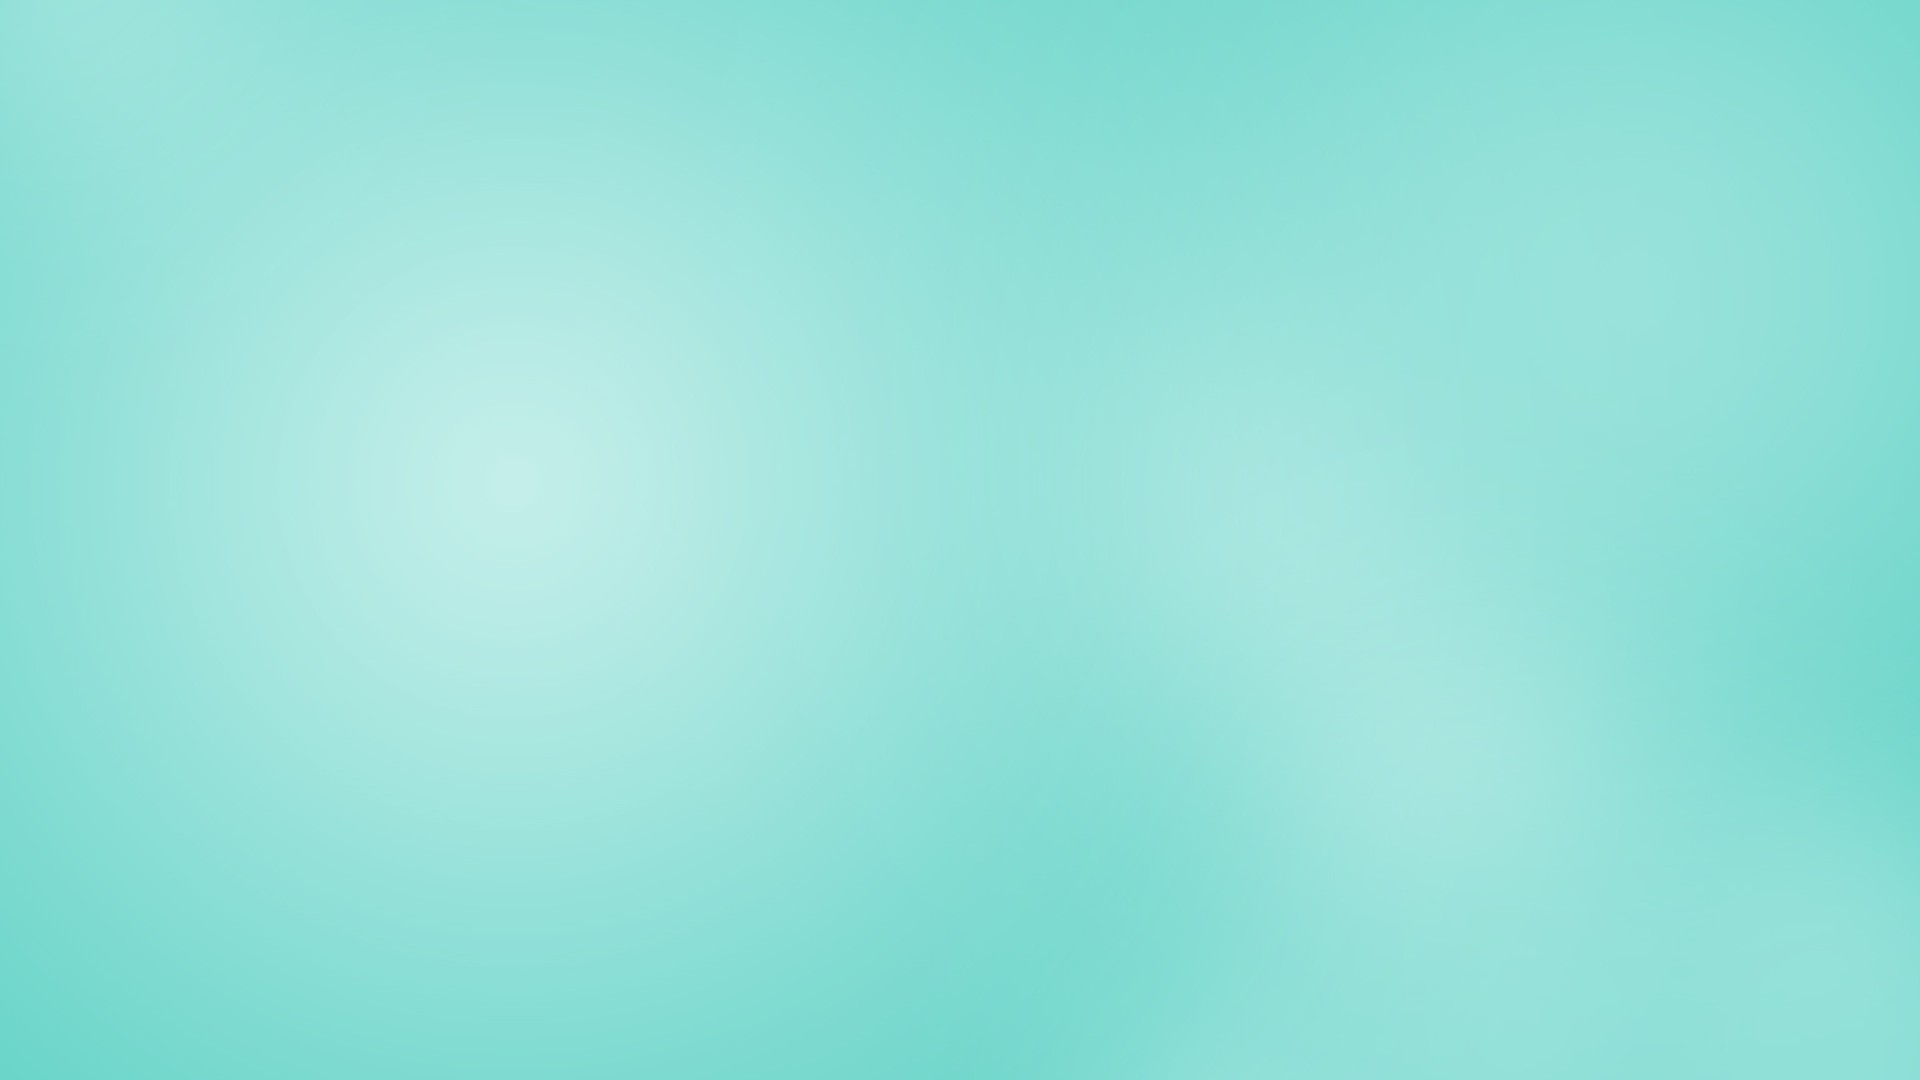 Mint Green Background Wallpaper HD With Resolution 1920X1080 pixel. You can make this wallpaper for your Desktop Computer Backgrounds, Mac Wallpapers, Android Lock screen or iPhone Screensavers